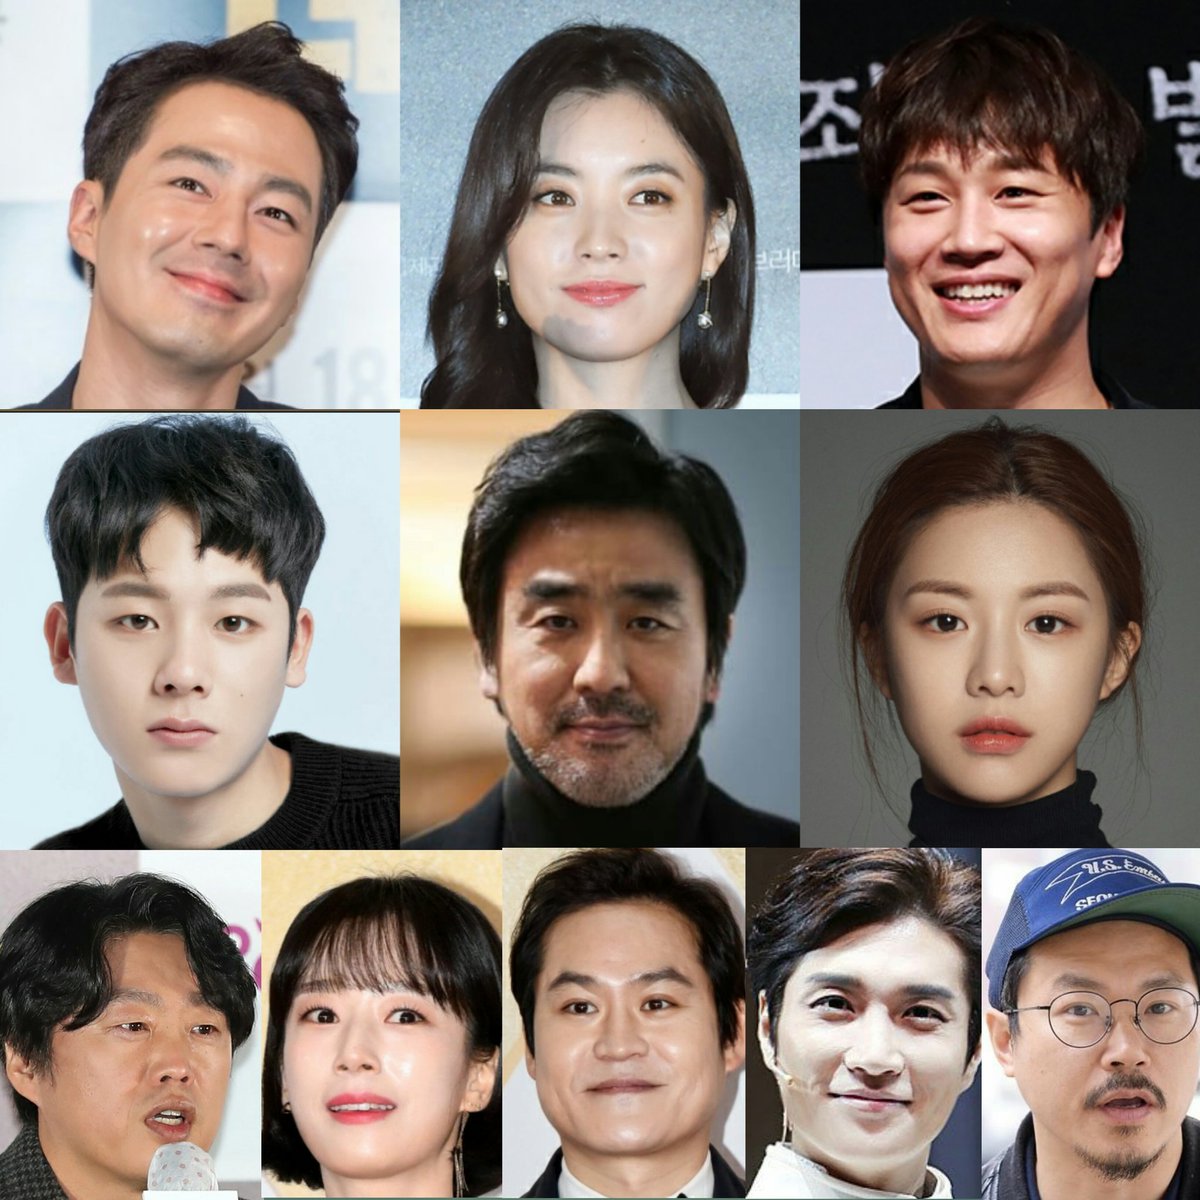 Actor #RyuSeungBeom Join the Cast of Disney+ drama #Moving, character detail isn’t revealed.

He's returning to industry after 2019 #TazzaOneEyedJack movie.

#JoInSung #HanHyoJoo #RyuSeungRyong #ChaTaeHyun